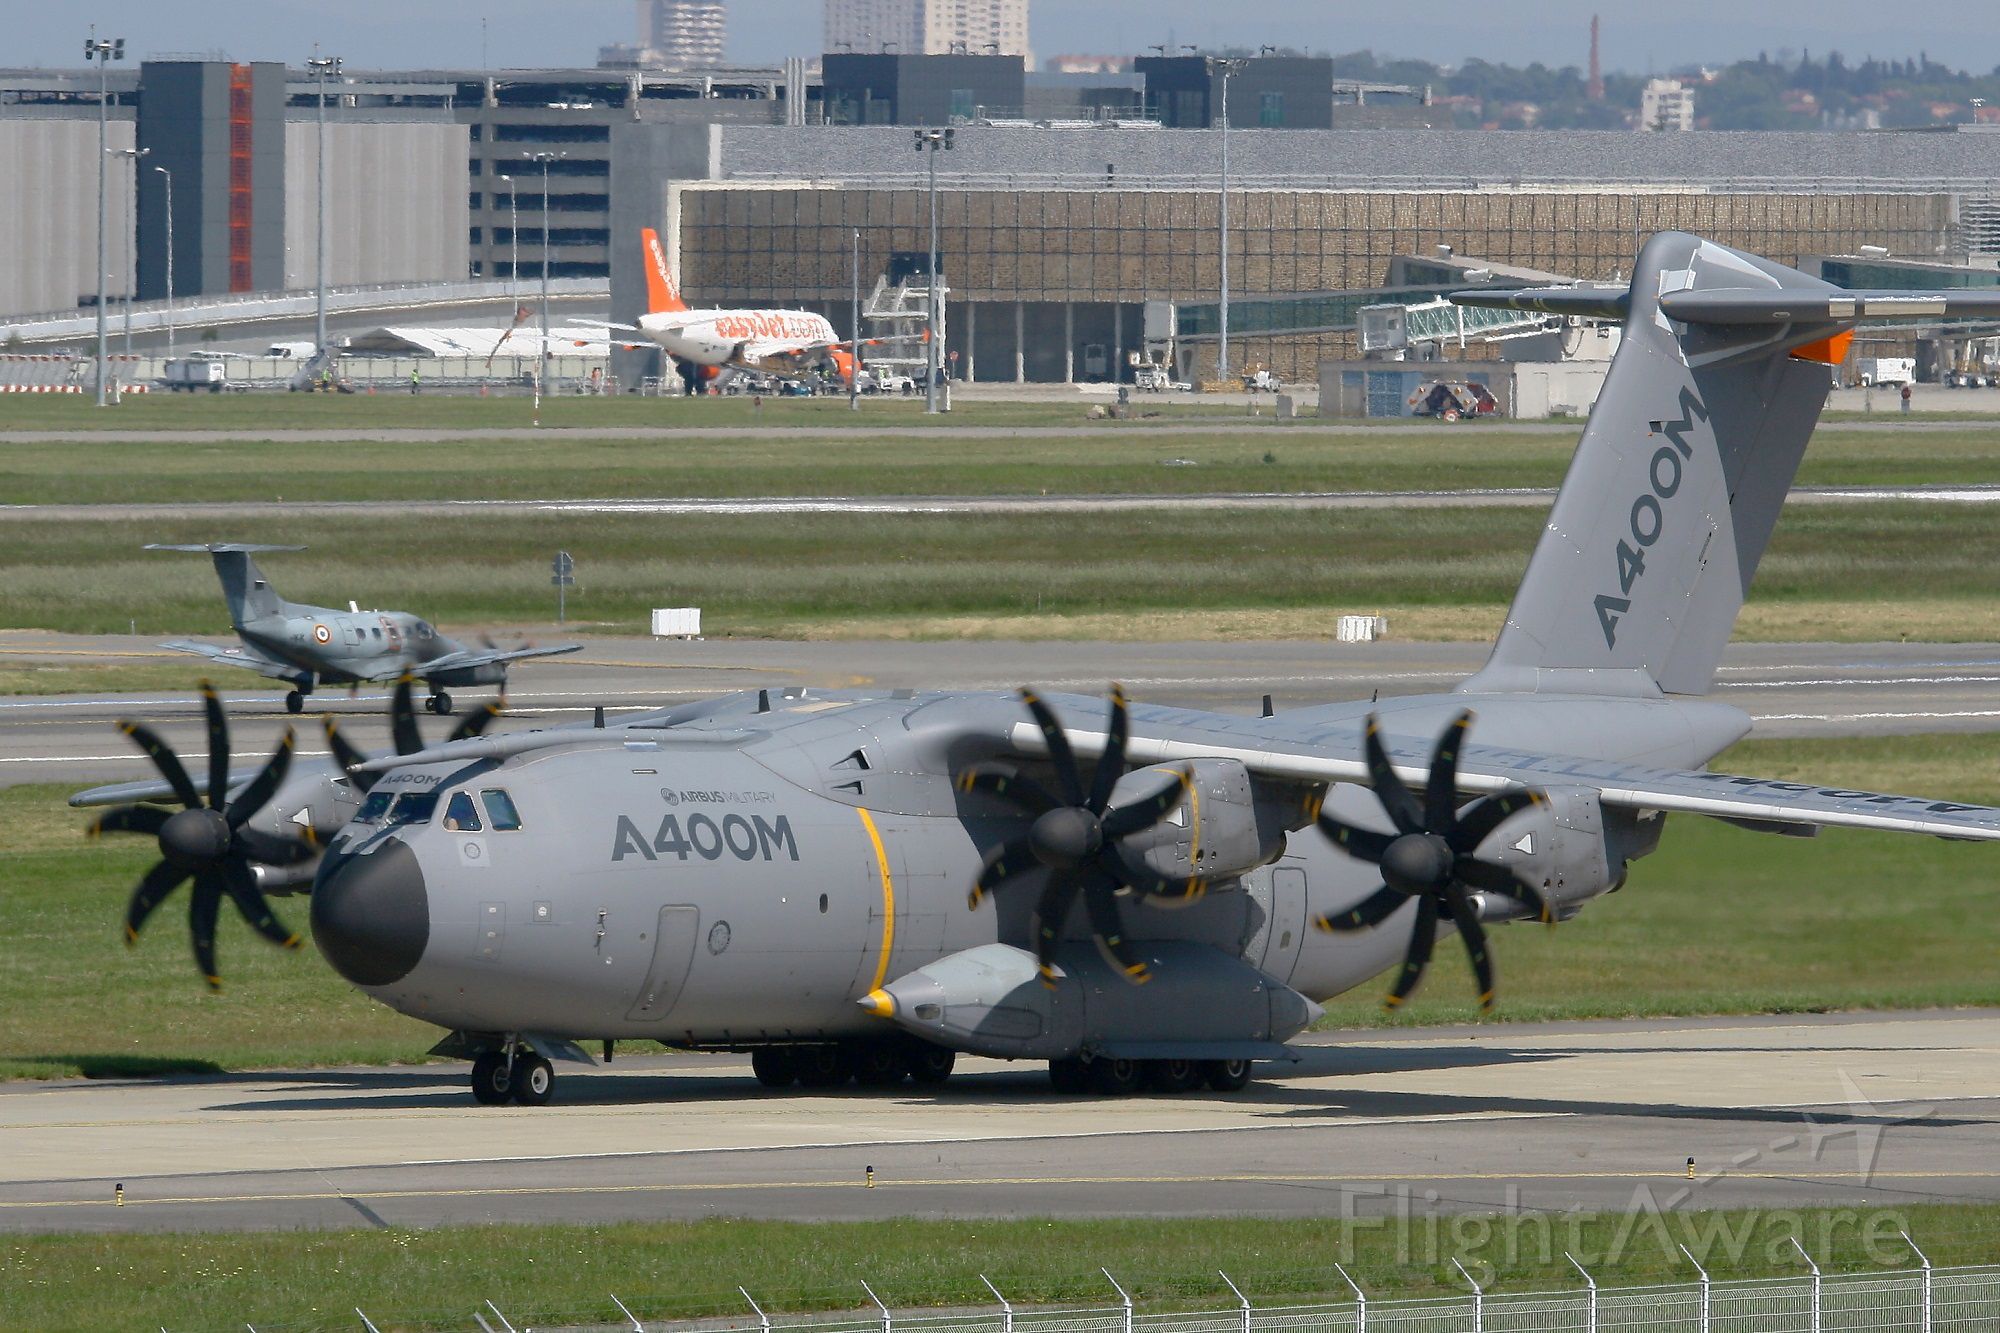 AIRBUS A-400M Atlas (F-WWMS) - Airbus Military A-400M Atlas, Taxiing Before Take-off Rwy 14R, Toulouse Blagnac Airport (LFBO-TLS)